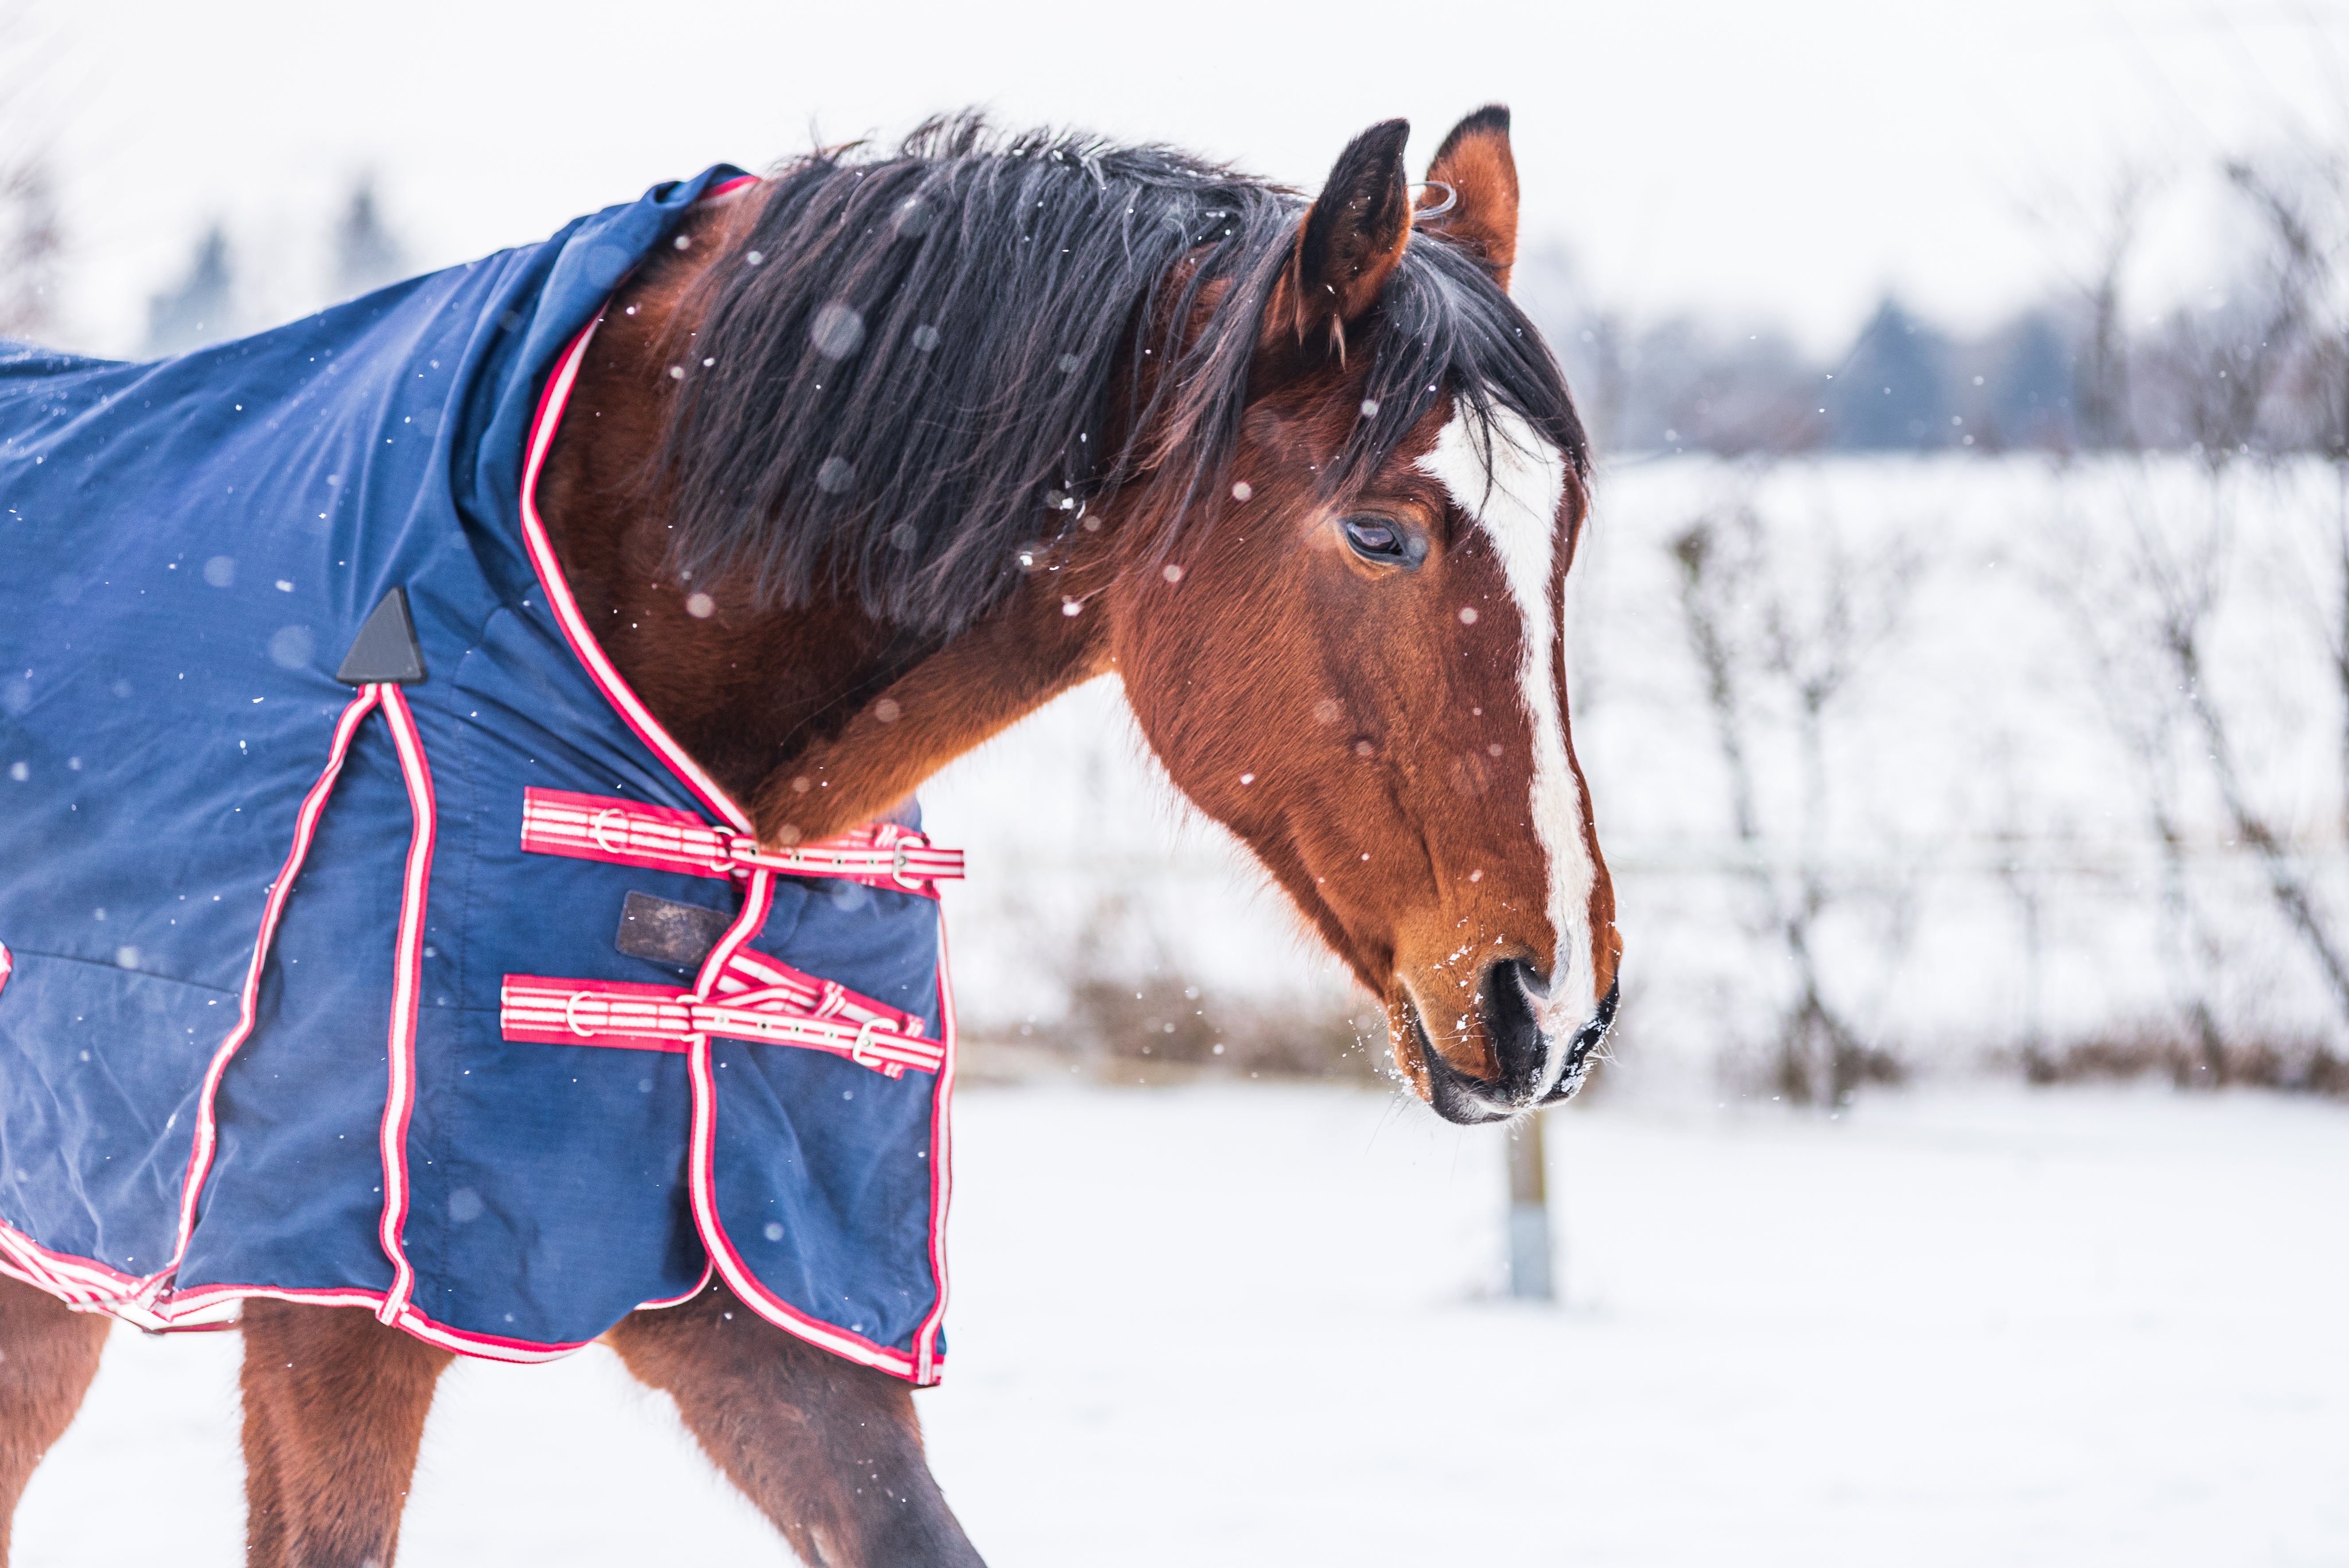 Horse wearing a winter coat in the snow